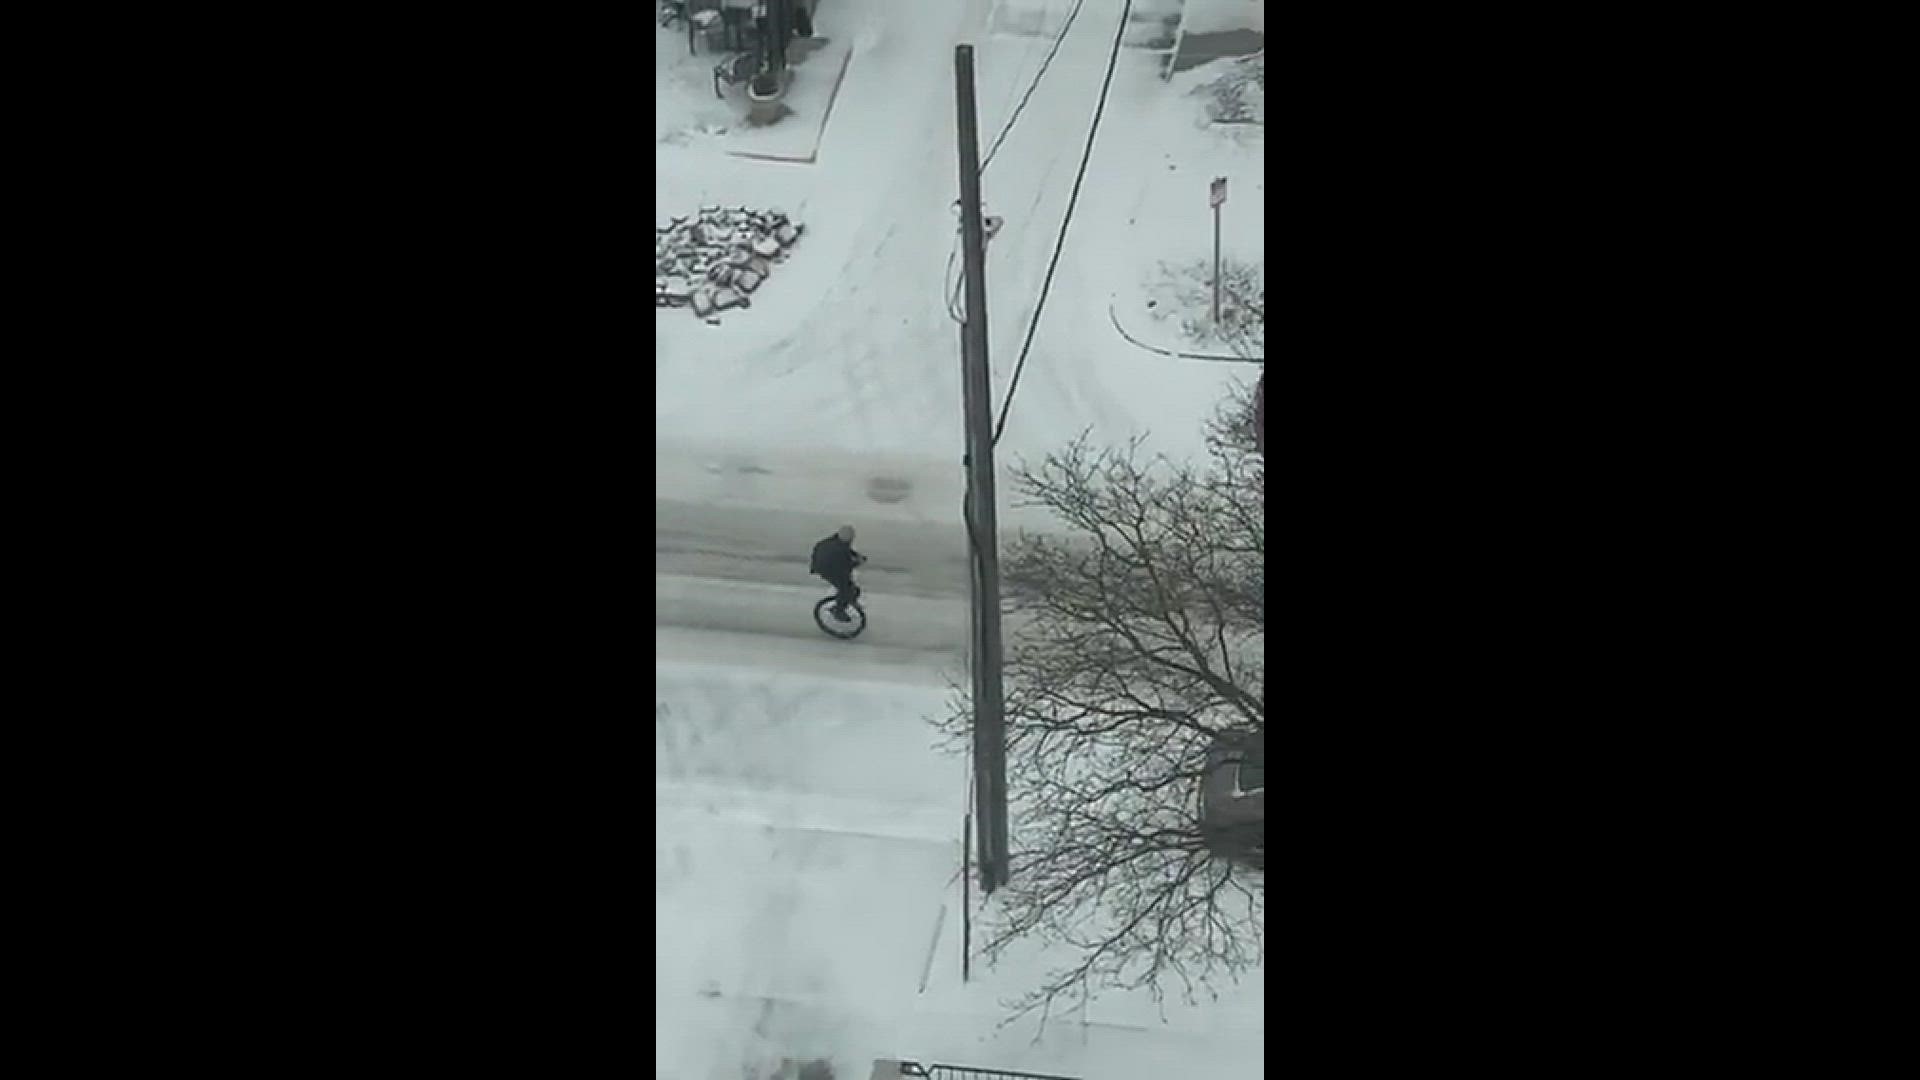 Snow unicycling. He wiped out just before this video but got right back up to continue social media posting.
Credit: John Gudvangen